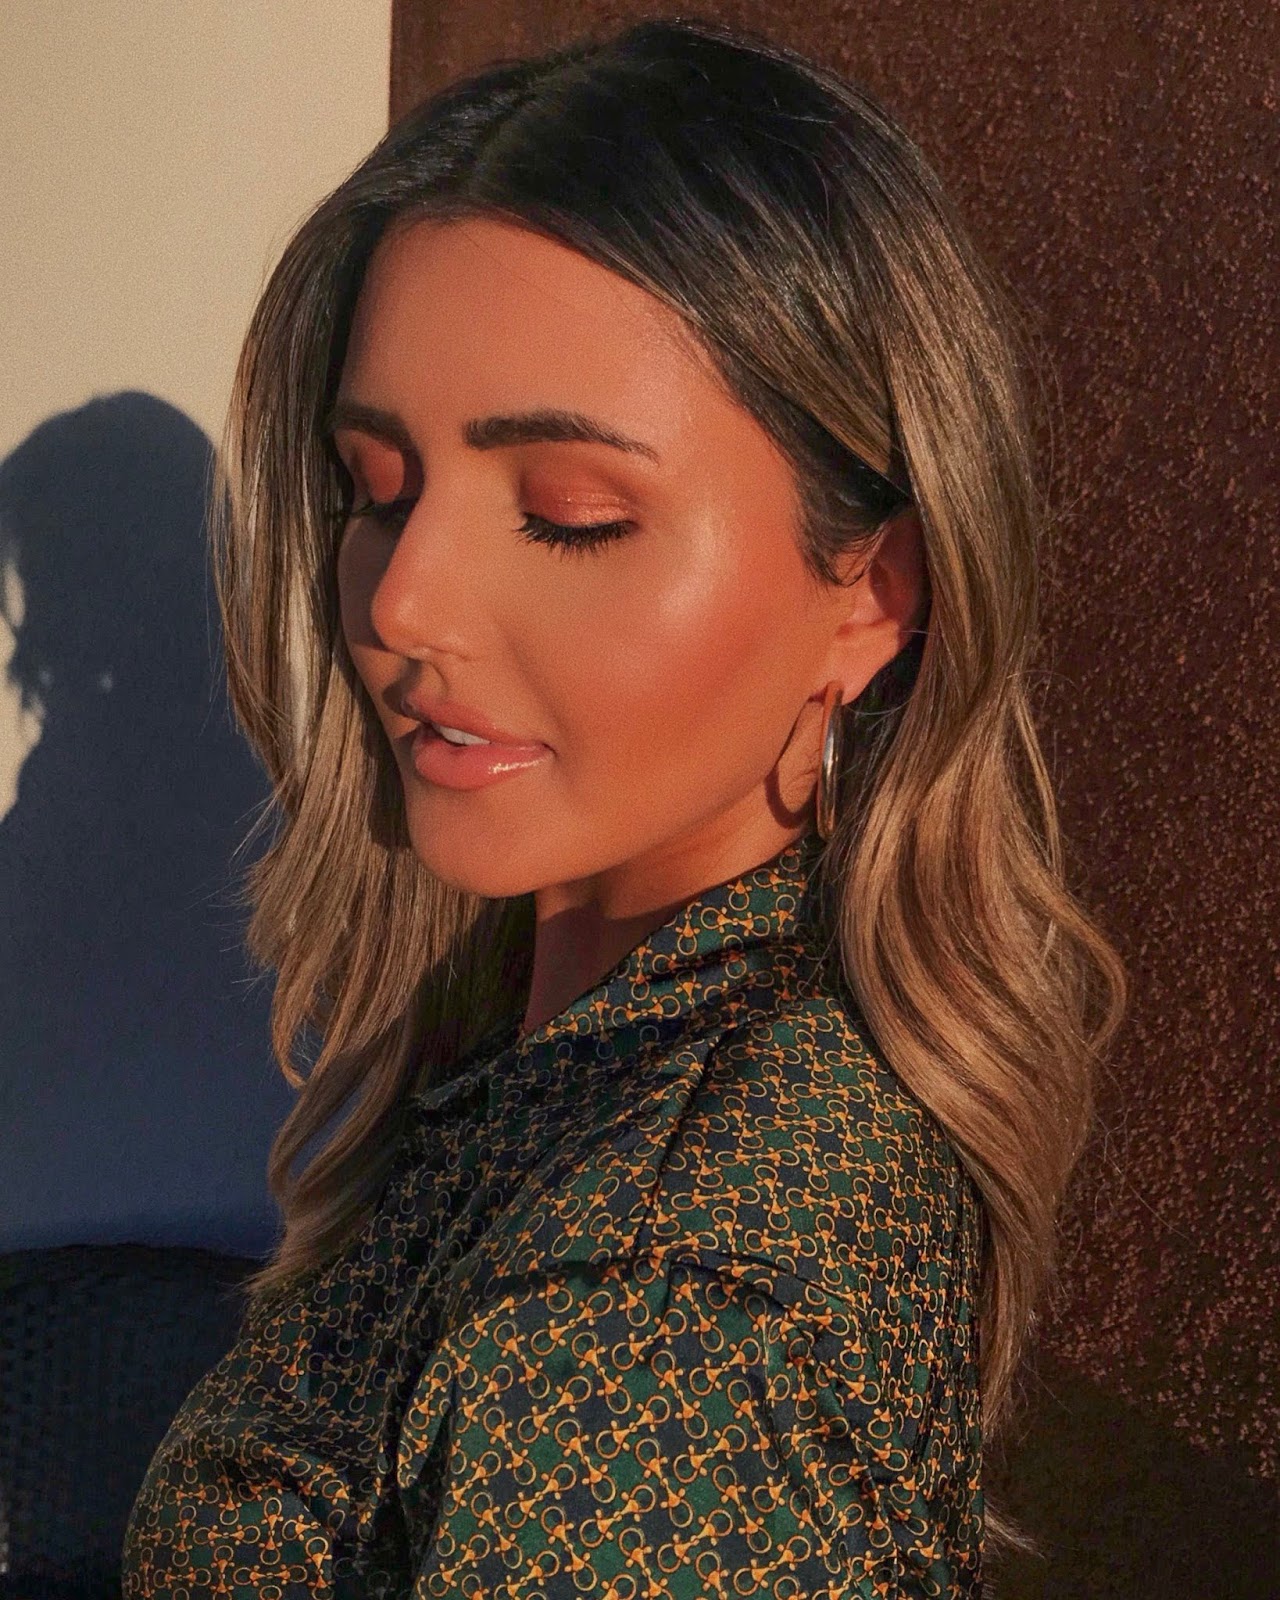 LA fall fashion, fall makeup, golden hour makeup look, Parmida Kiani, blonde hair, Persian blogger, la blogger, west coast blogger, golden blonde hair, huda beauty, rose gold remastered palette, dose of colors on repeat gloss, motd, fall beauty favorite, makeup Inspo, makeup look, olive skin,